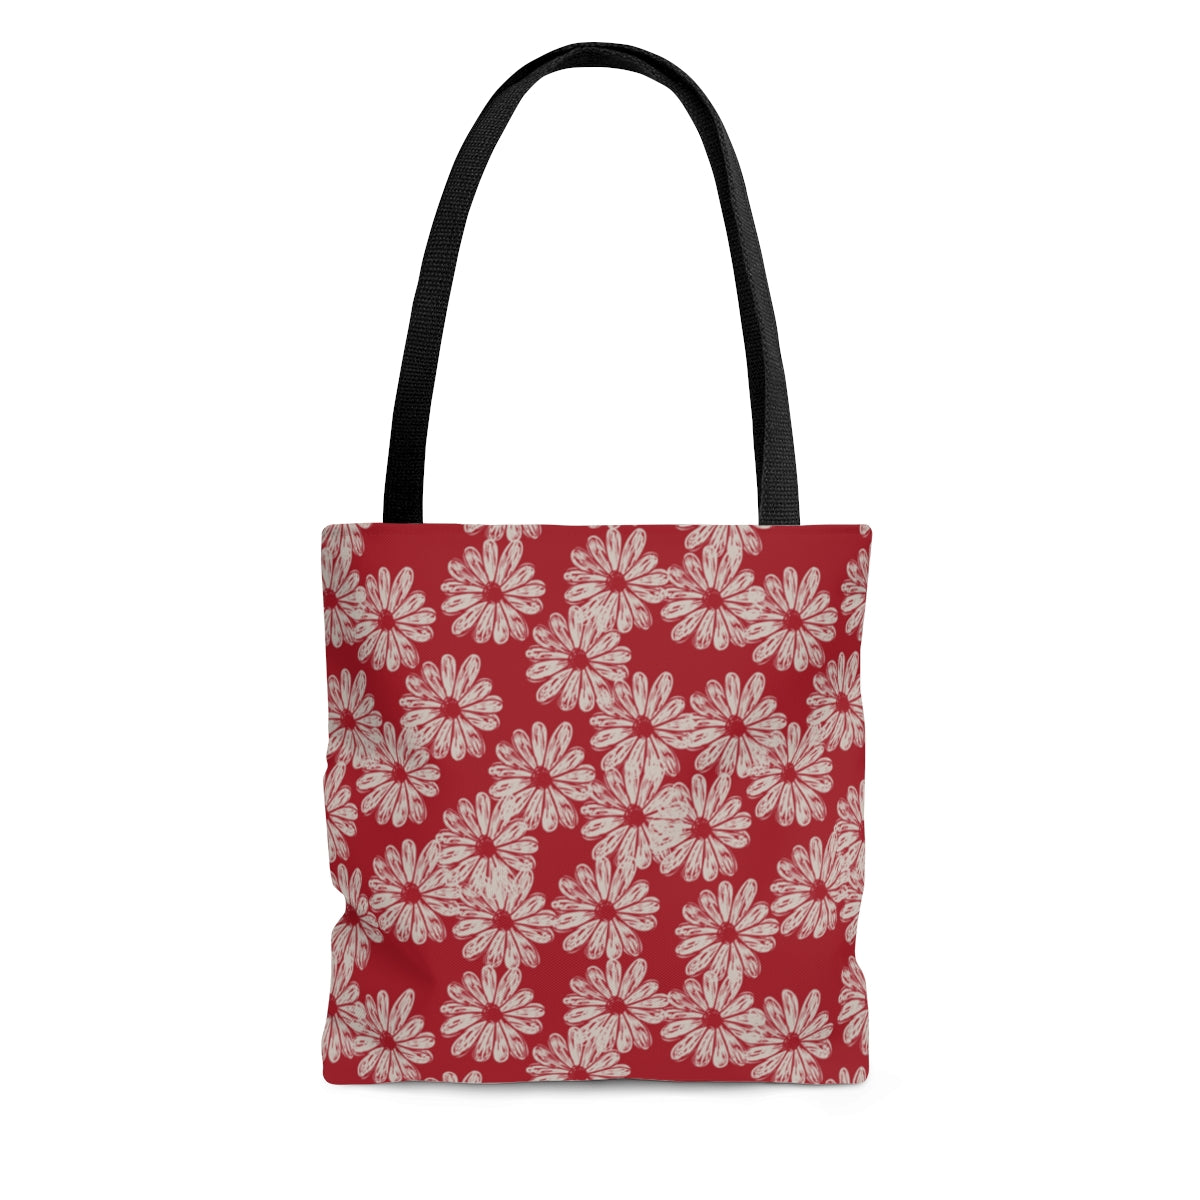 SWEET DAISY RED - Tote Bag